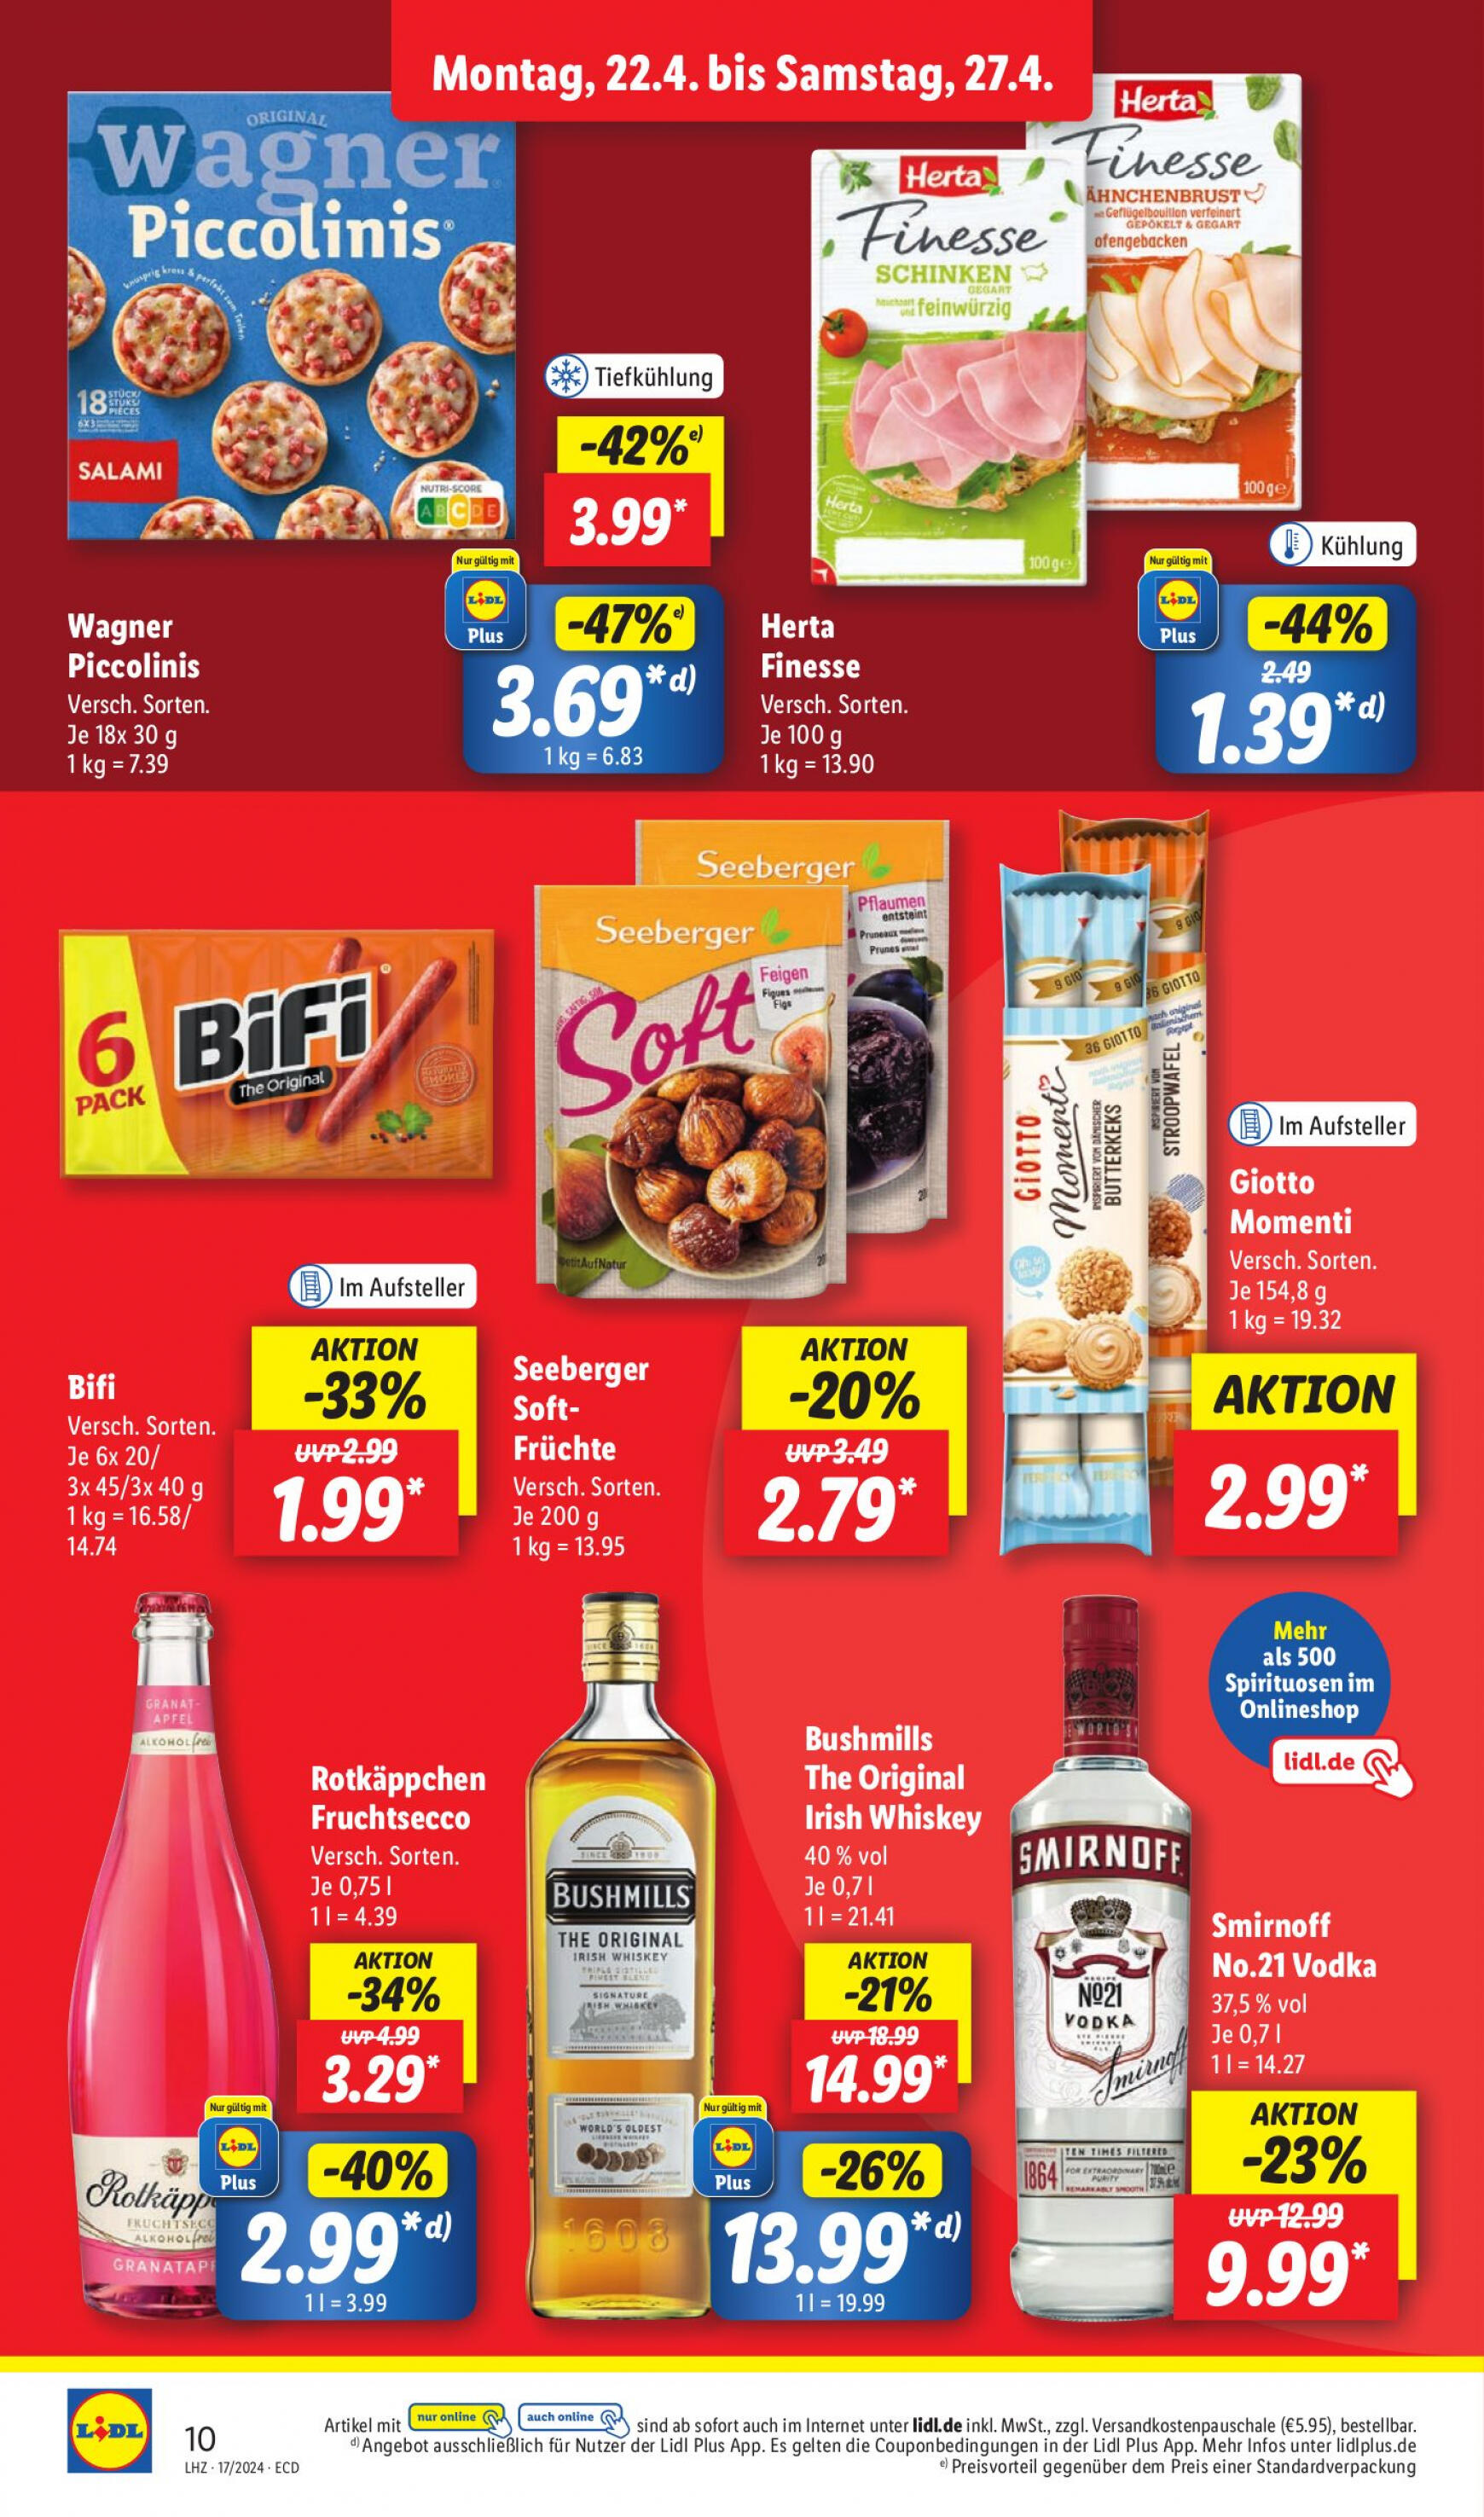 lidl - Flyer Lidl aktuell 22.04. - 27.04. - page: 16